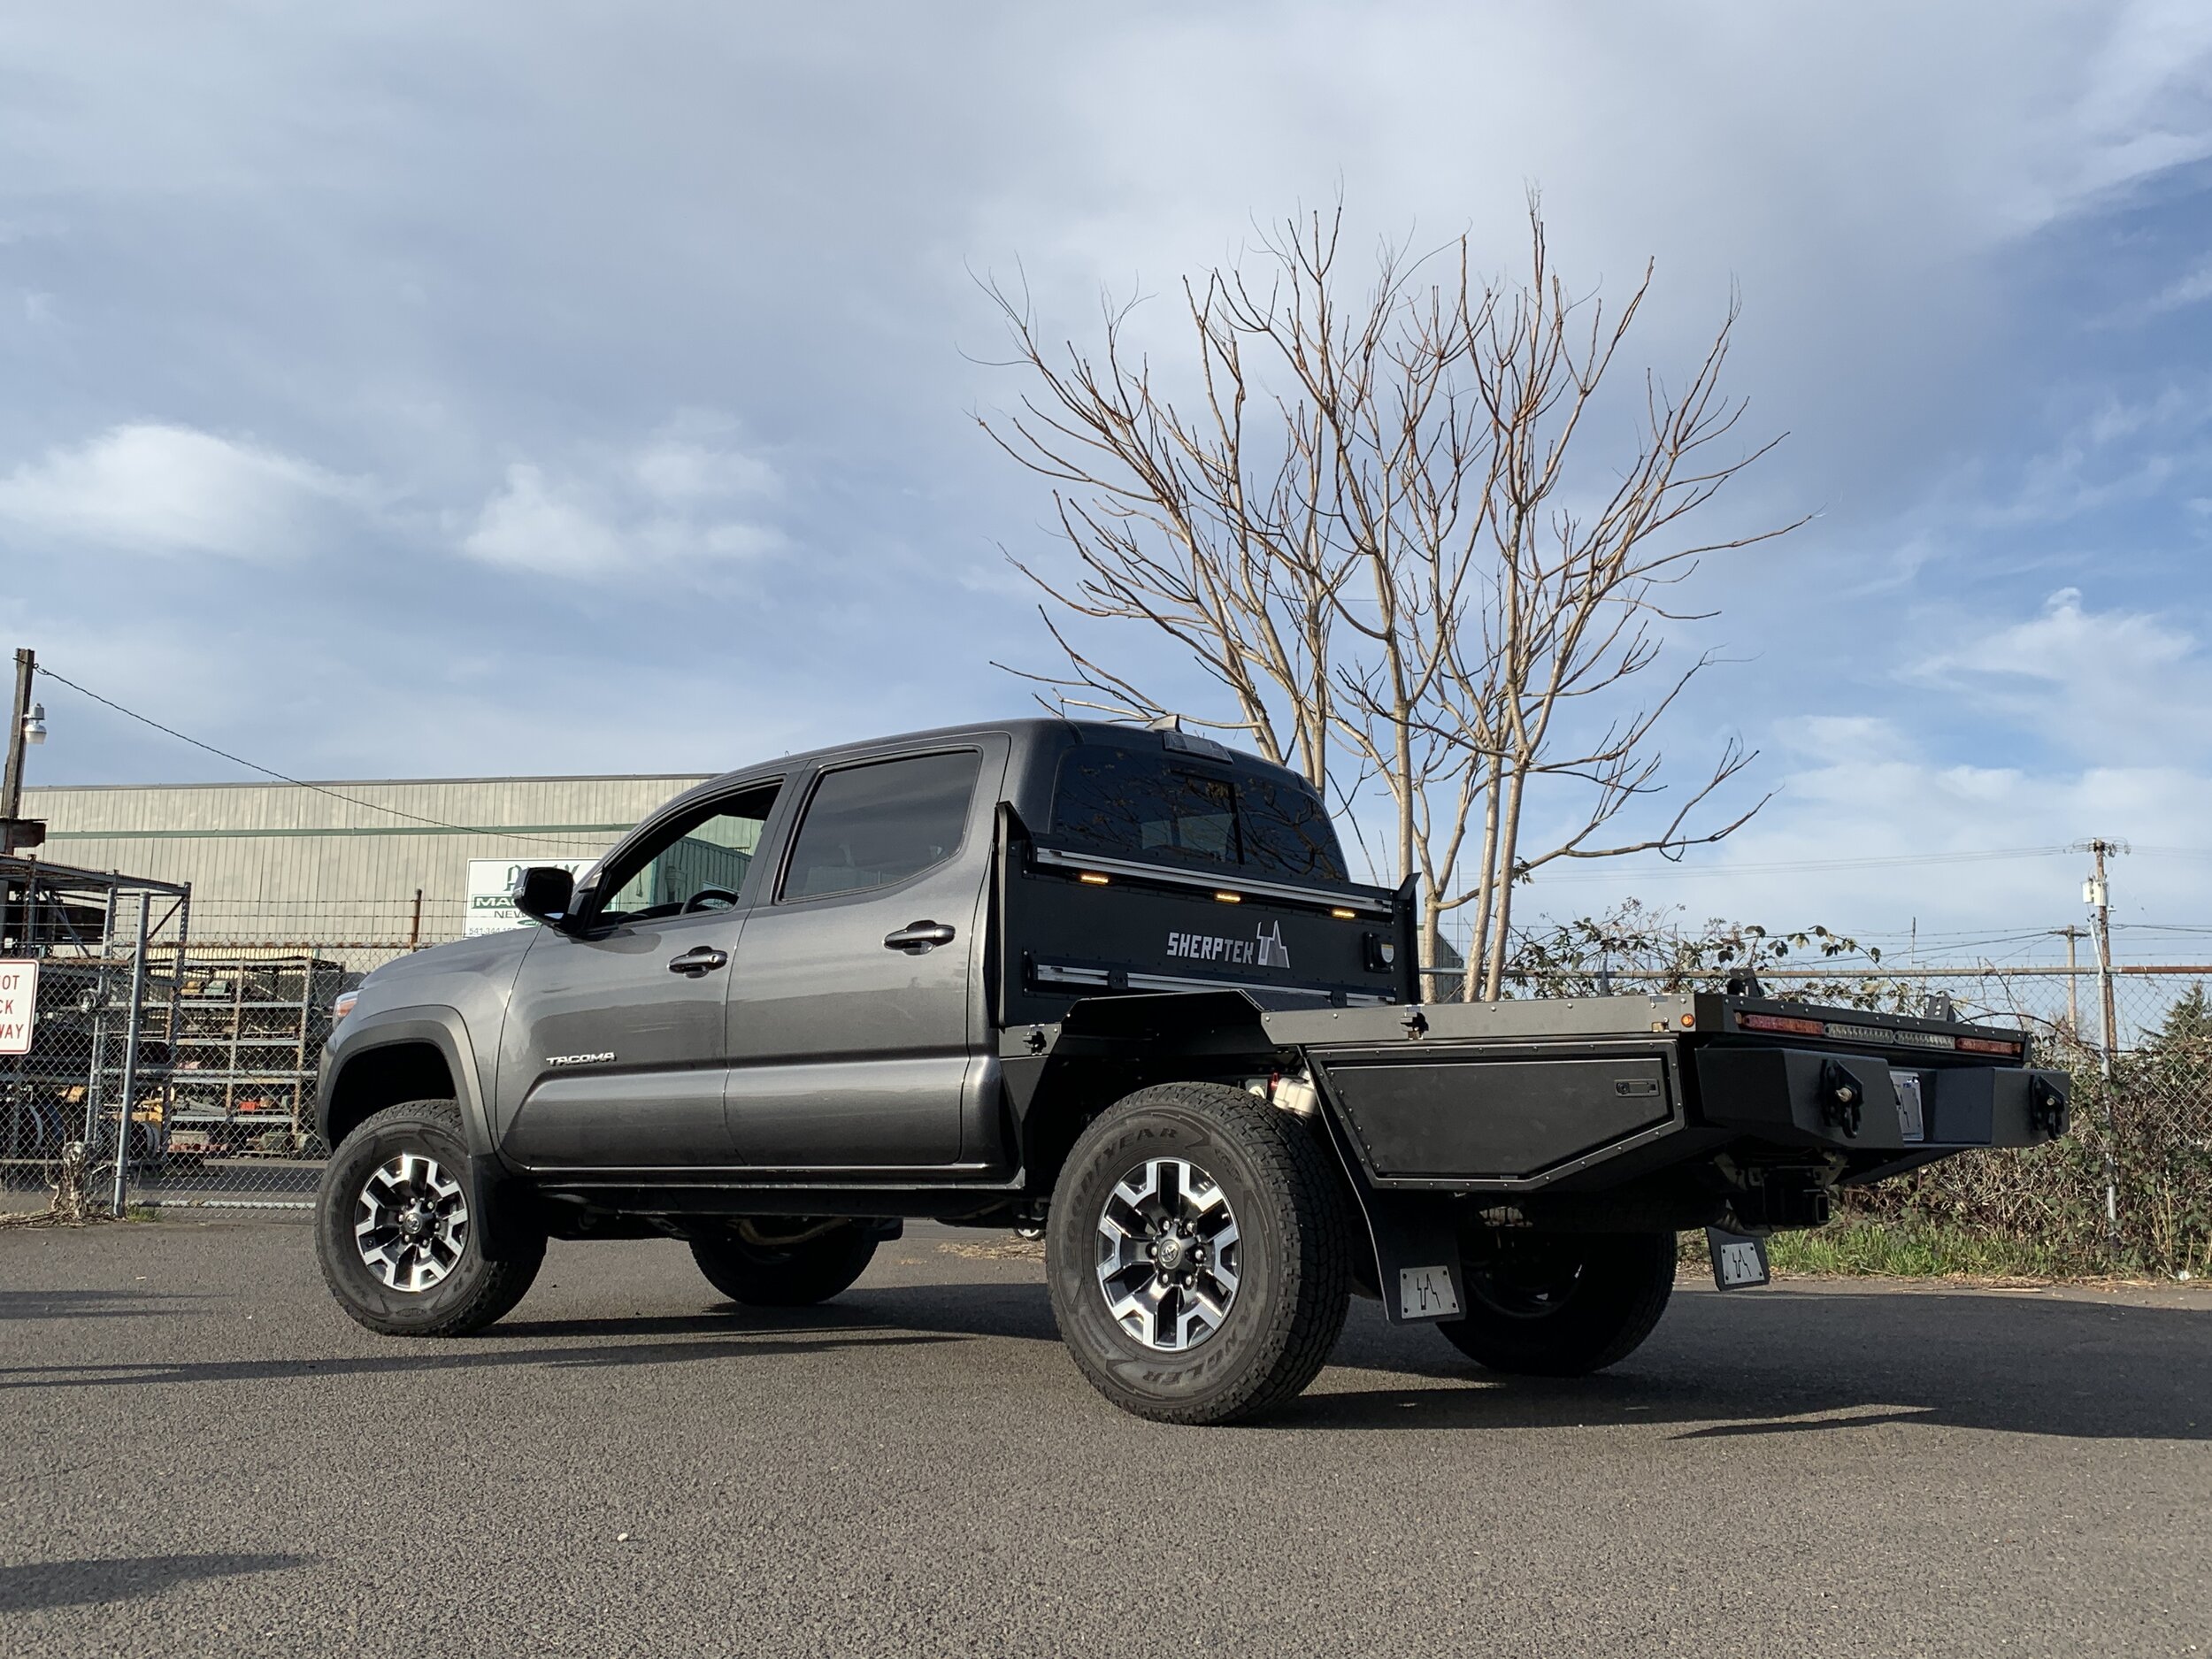 The Sherptek Truck Tray For The Toyota Tacoma Sherptek Custom Gear Hauling Solutions Flatbeds Truck Decks And Truck Trays